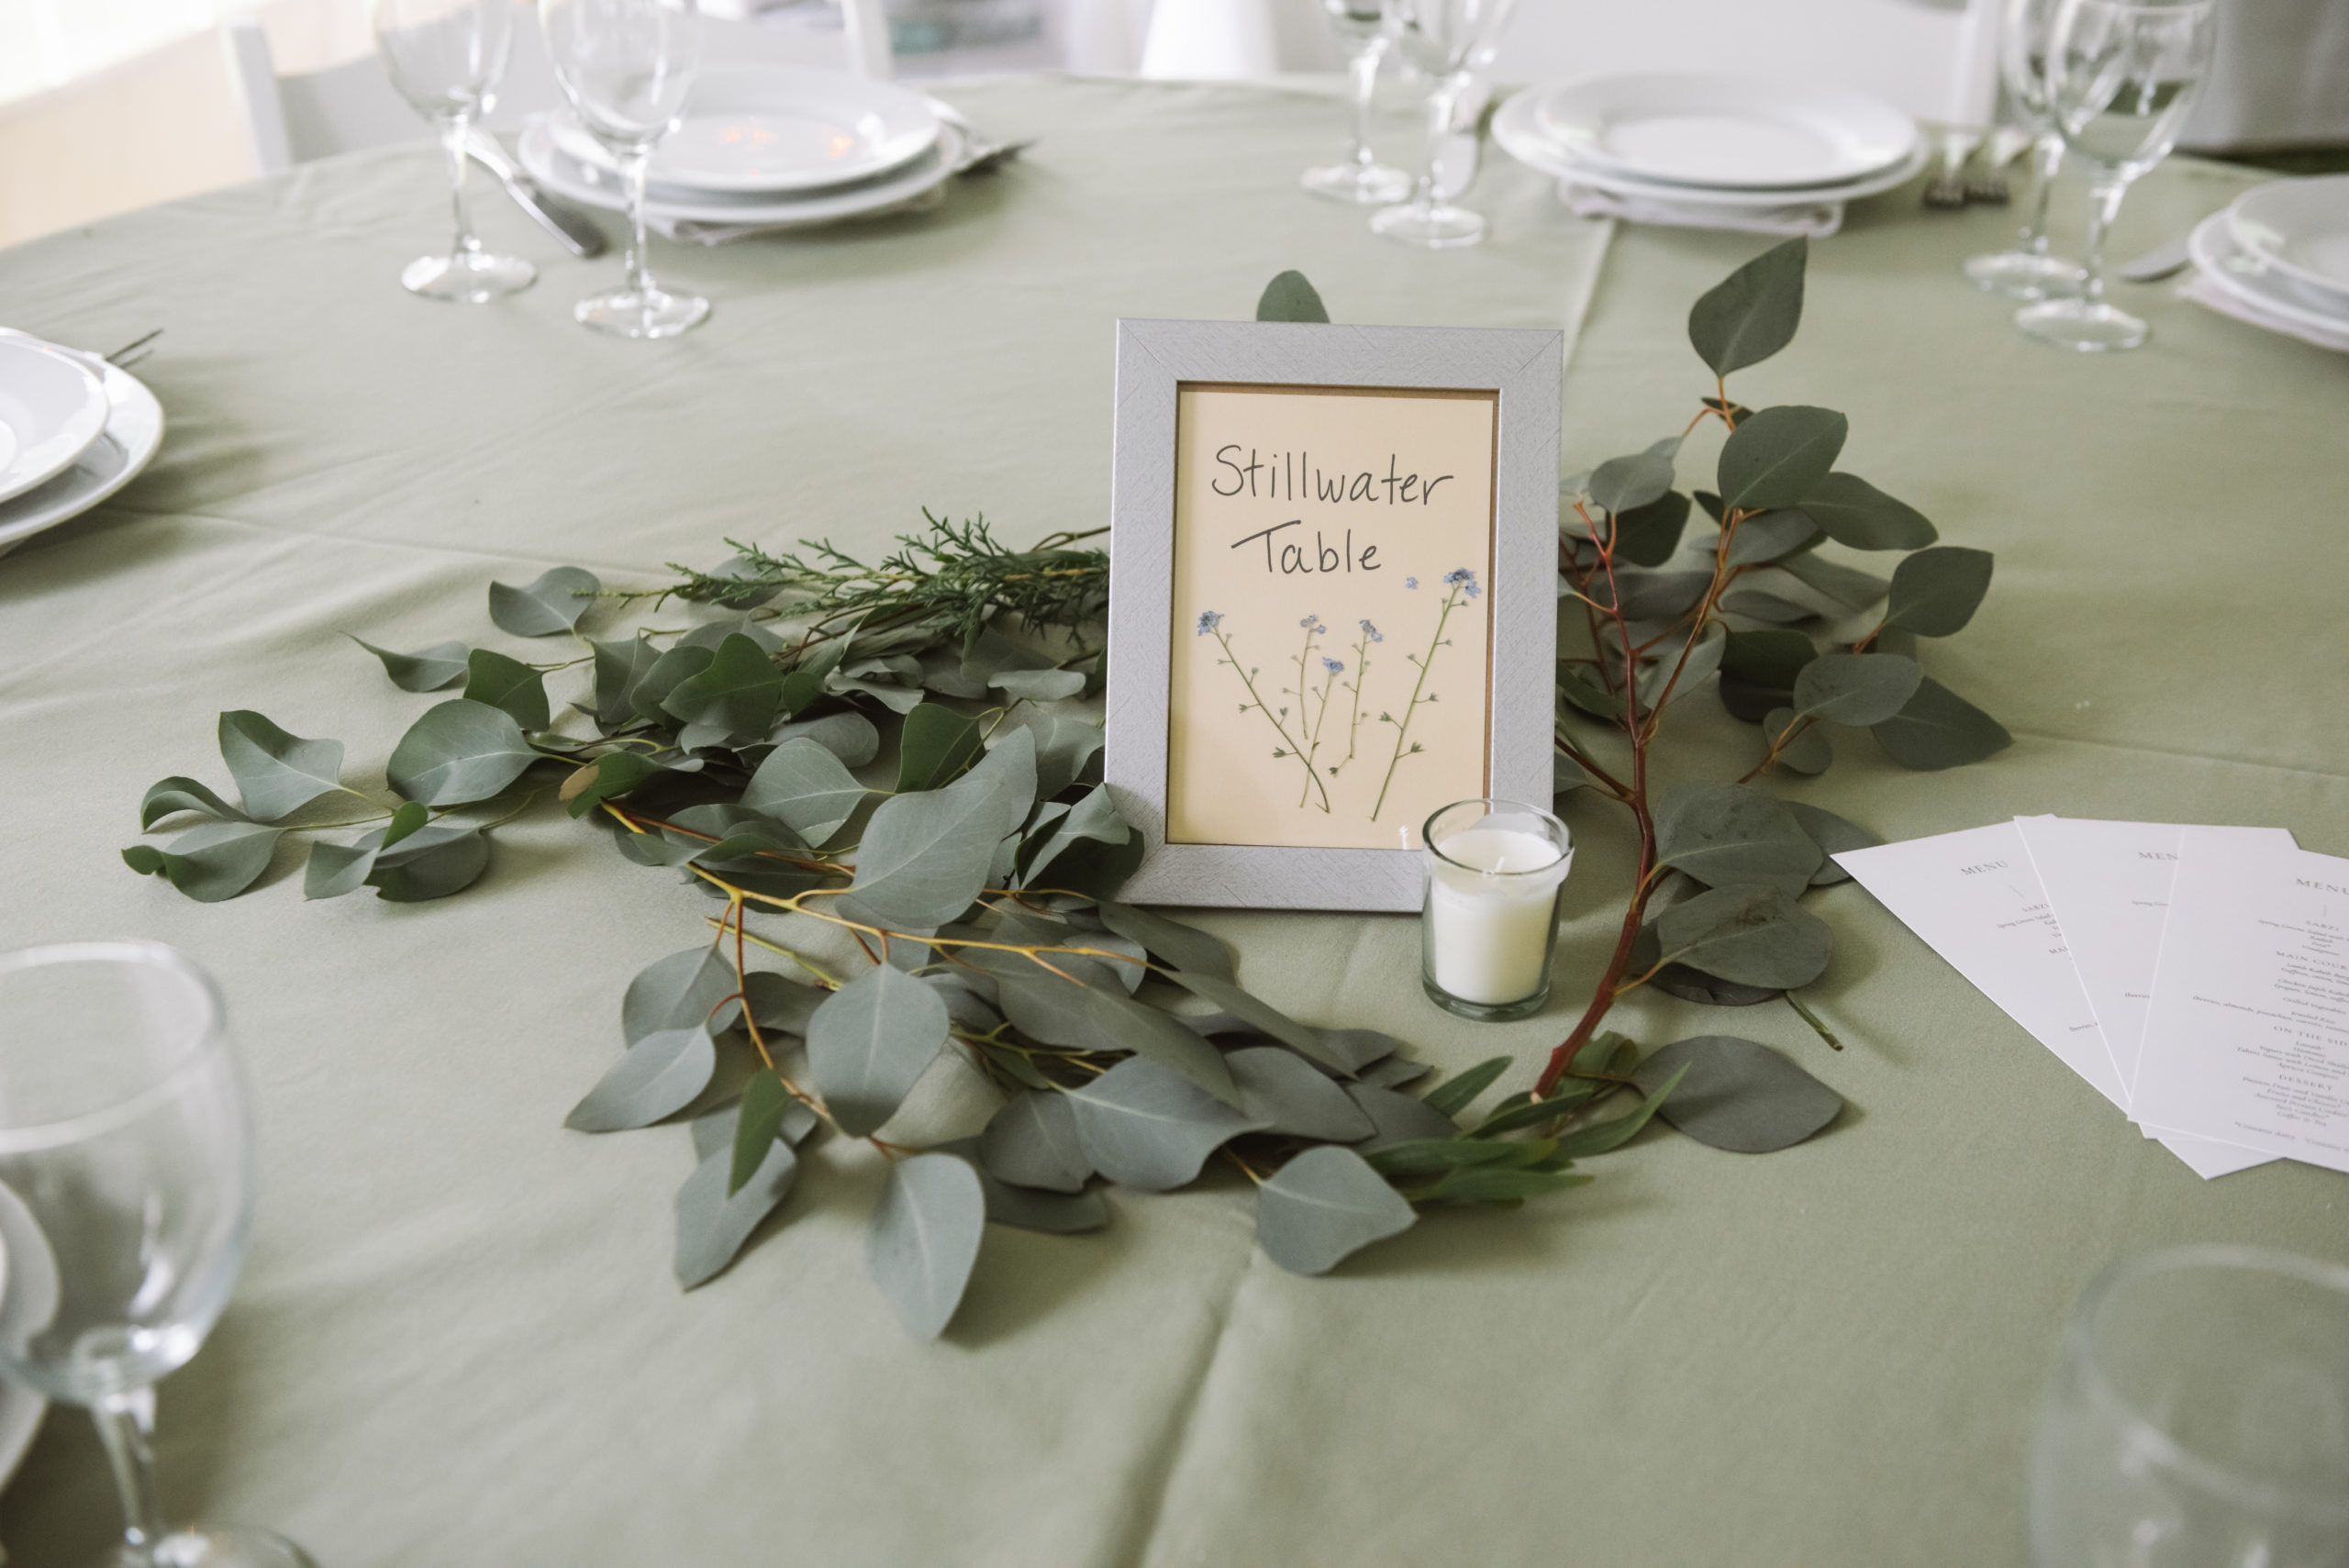 "Stillwater Table" silver framed table sign with dried flowers under the name. The frame is surrounded by greenery and an unlit white small candle. It is in the center of a reception table.